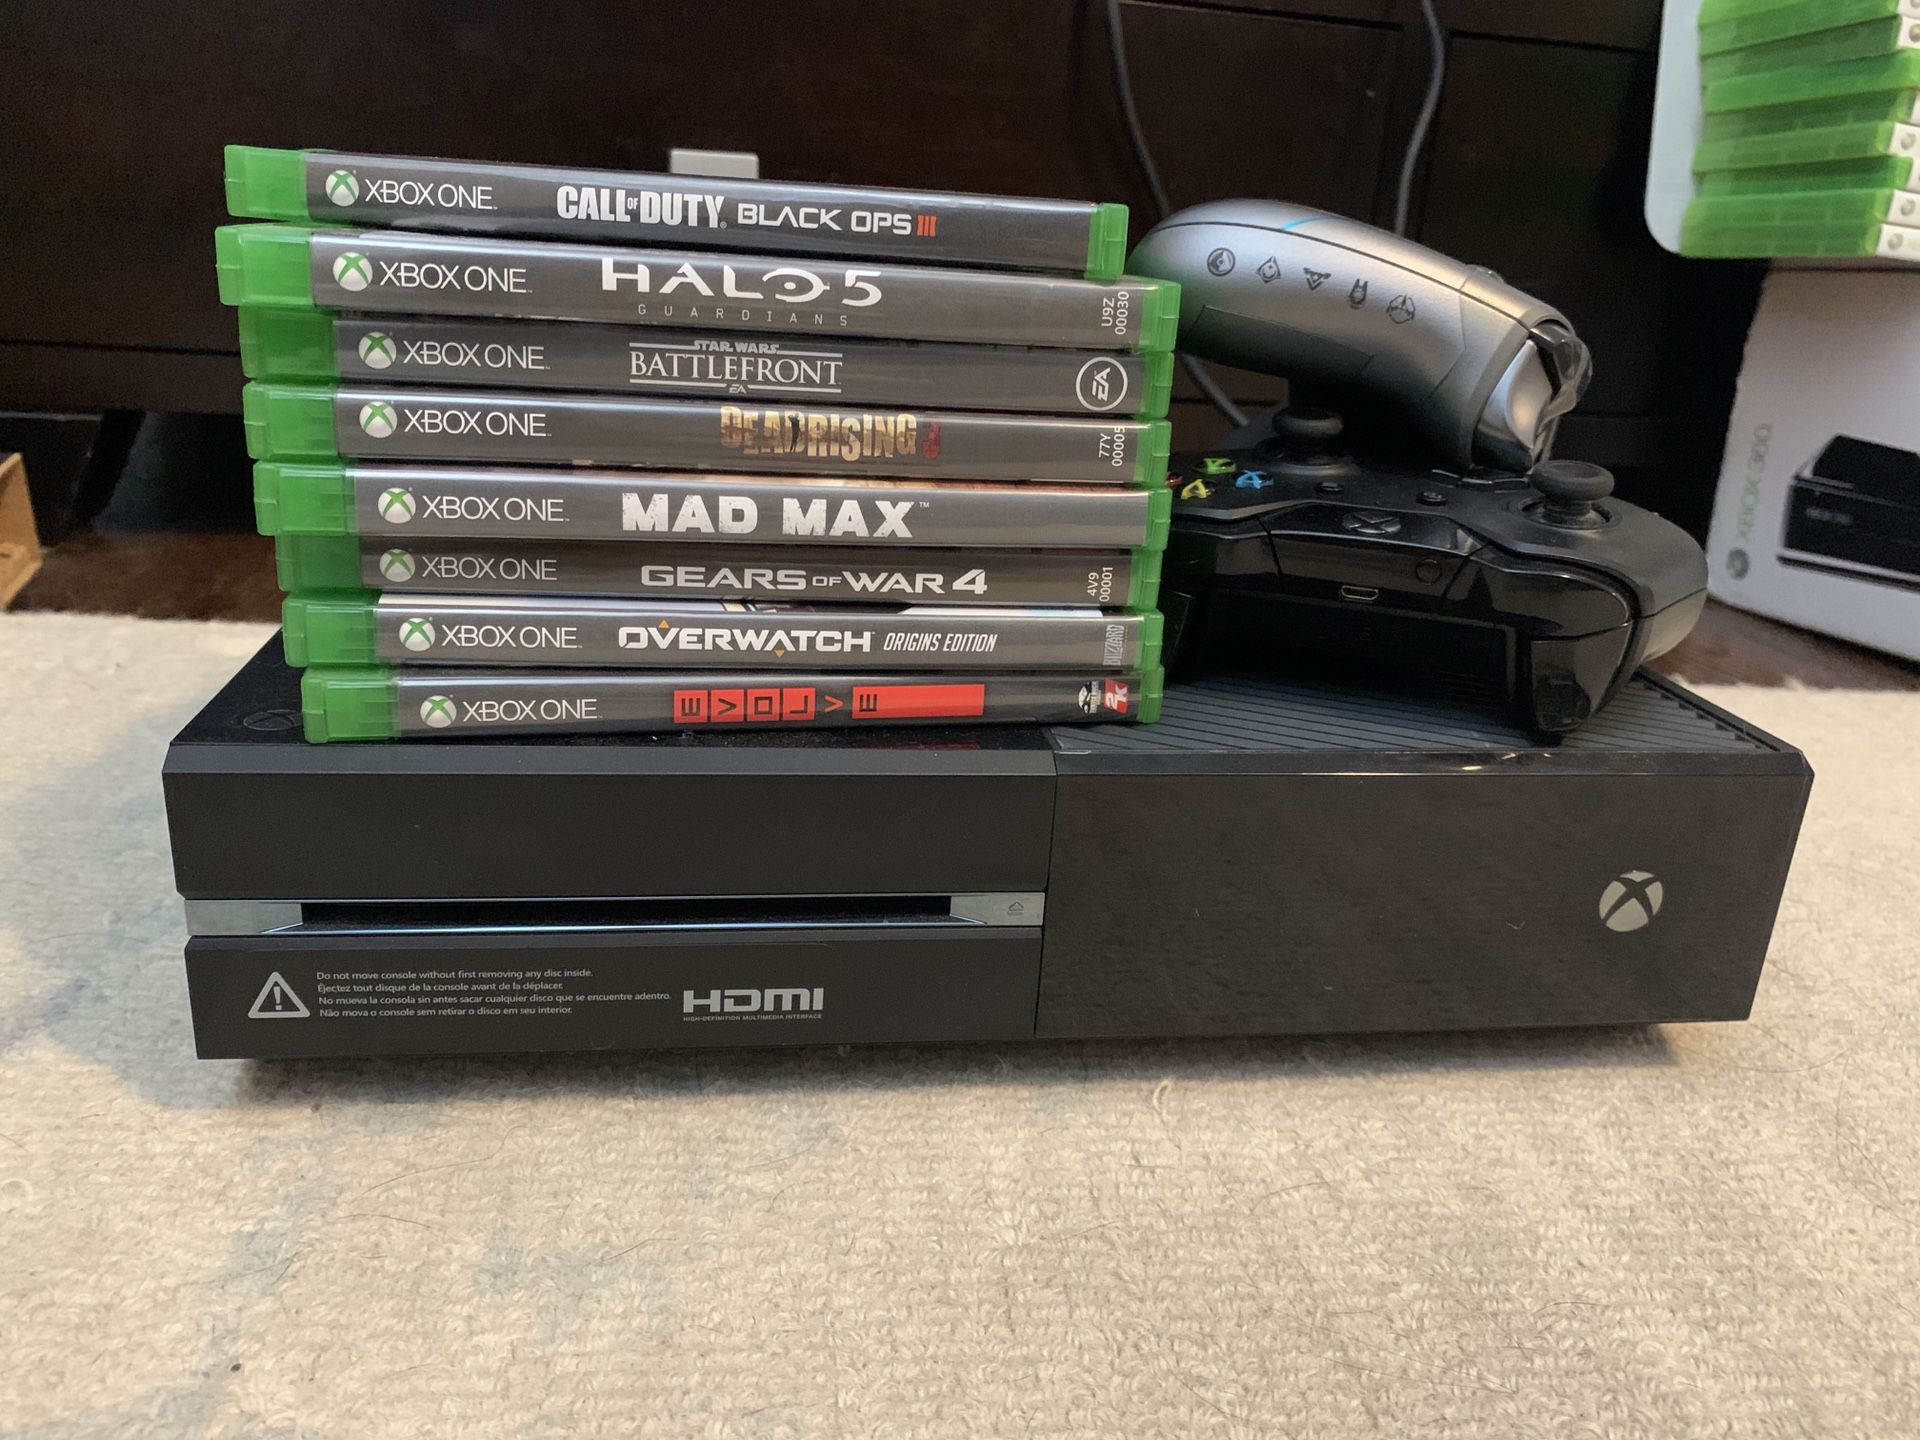 Xbox One/8 Video games/2 controllers/2 headphones